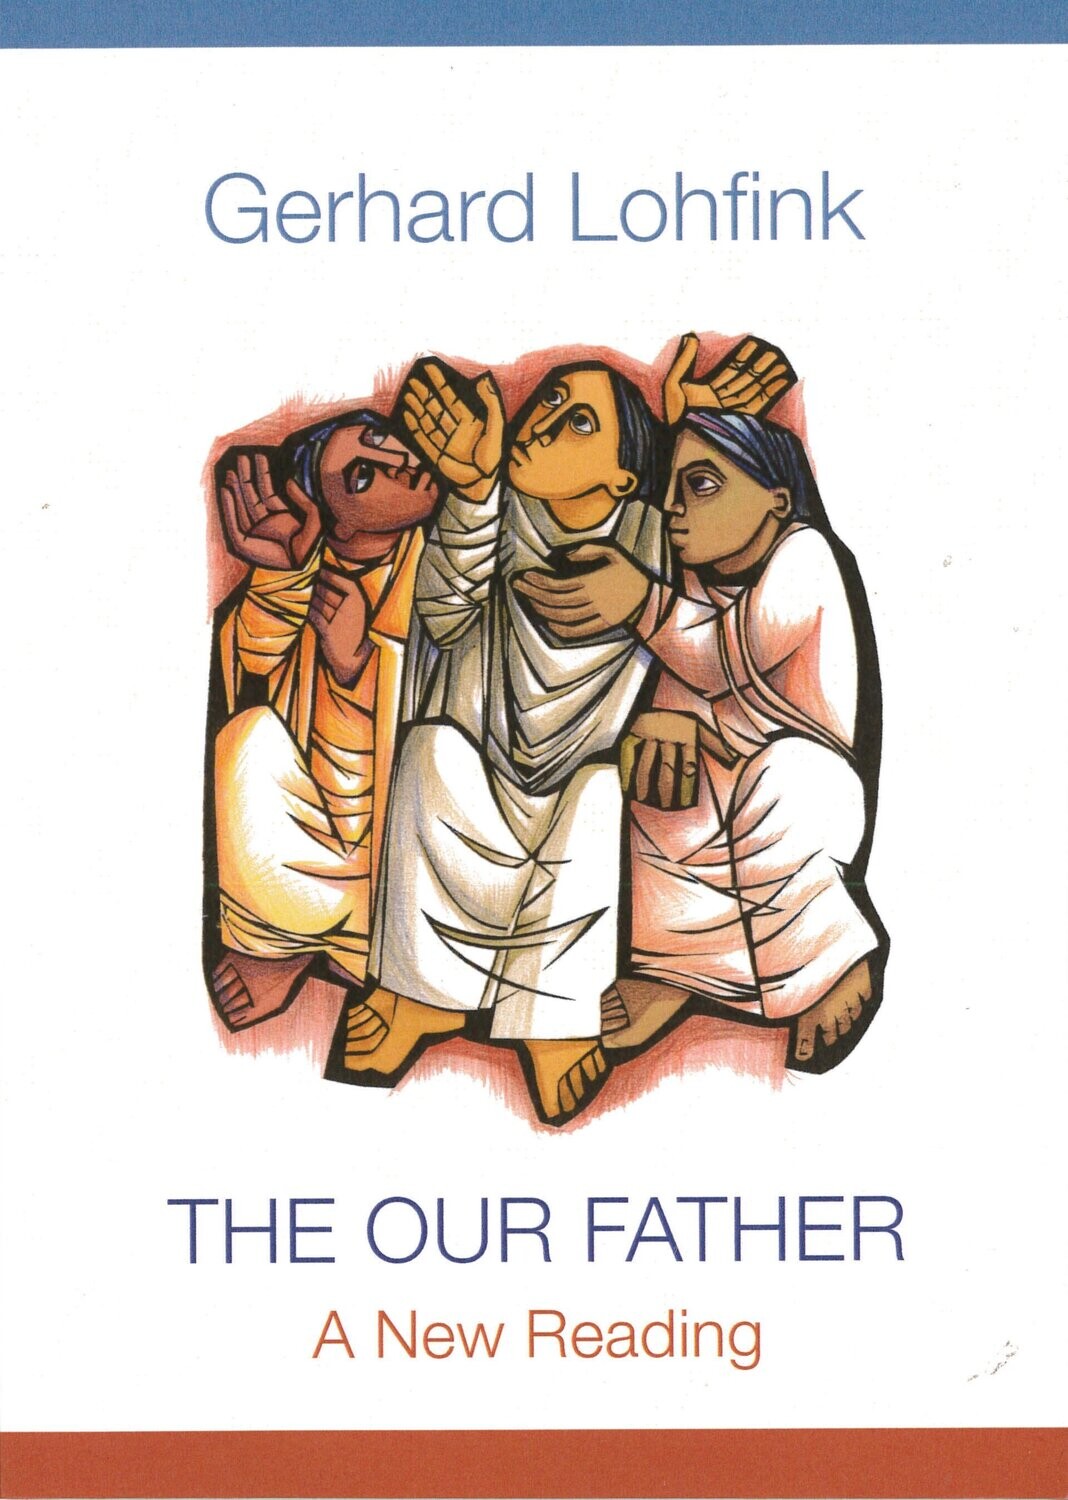 The Our Father: A New Reading by Gerhard Lohfink